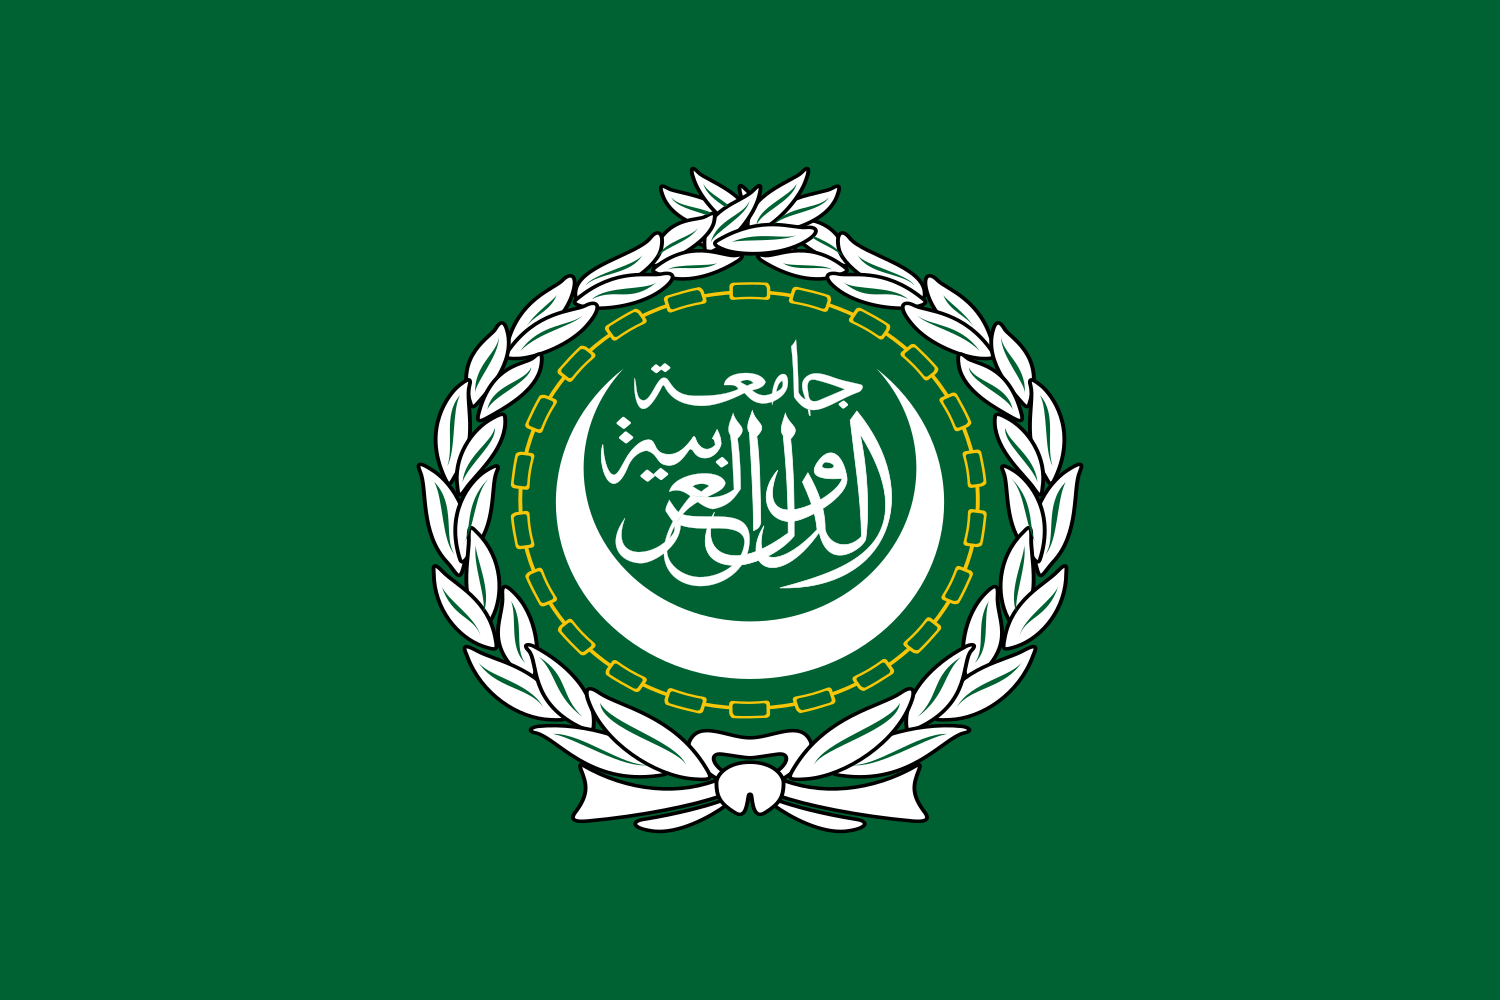 File:Flag of the Syrian revolution (small stars).svg - Wikipedia